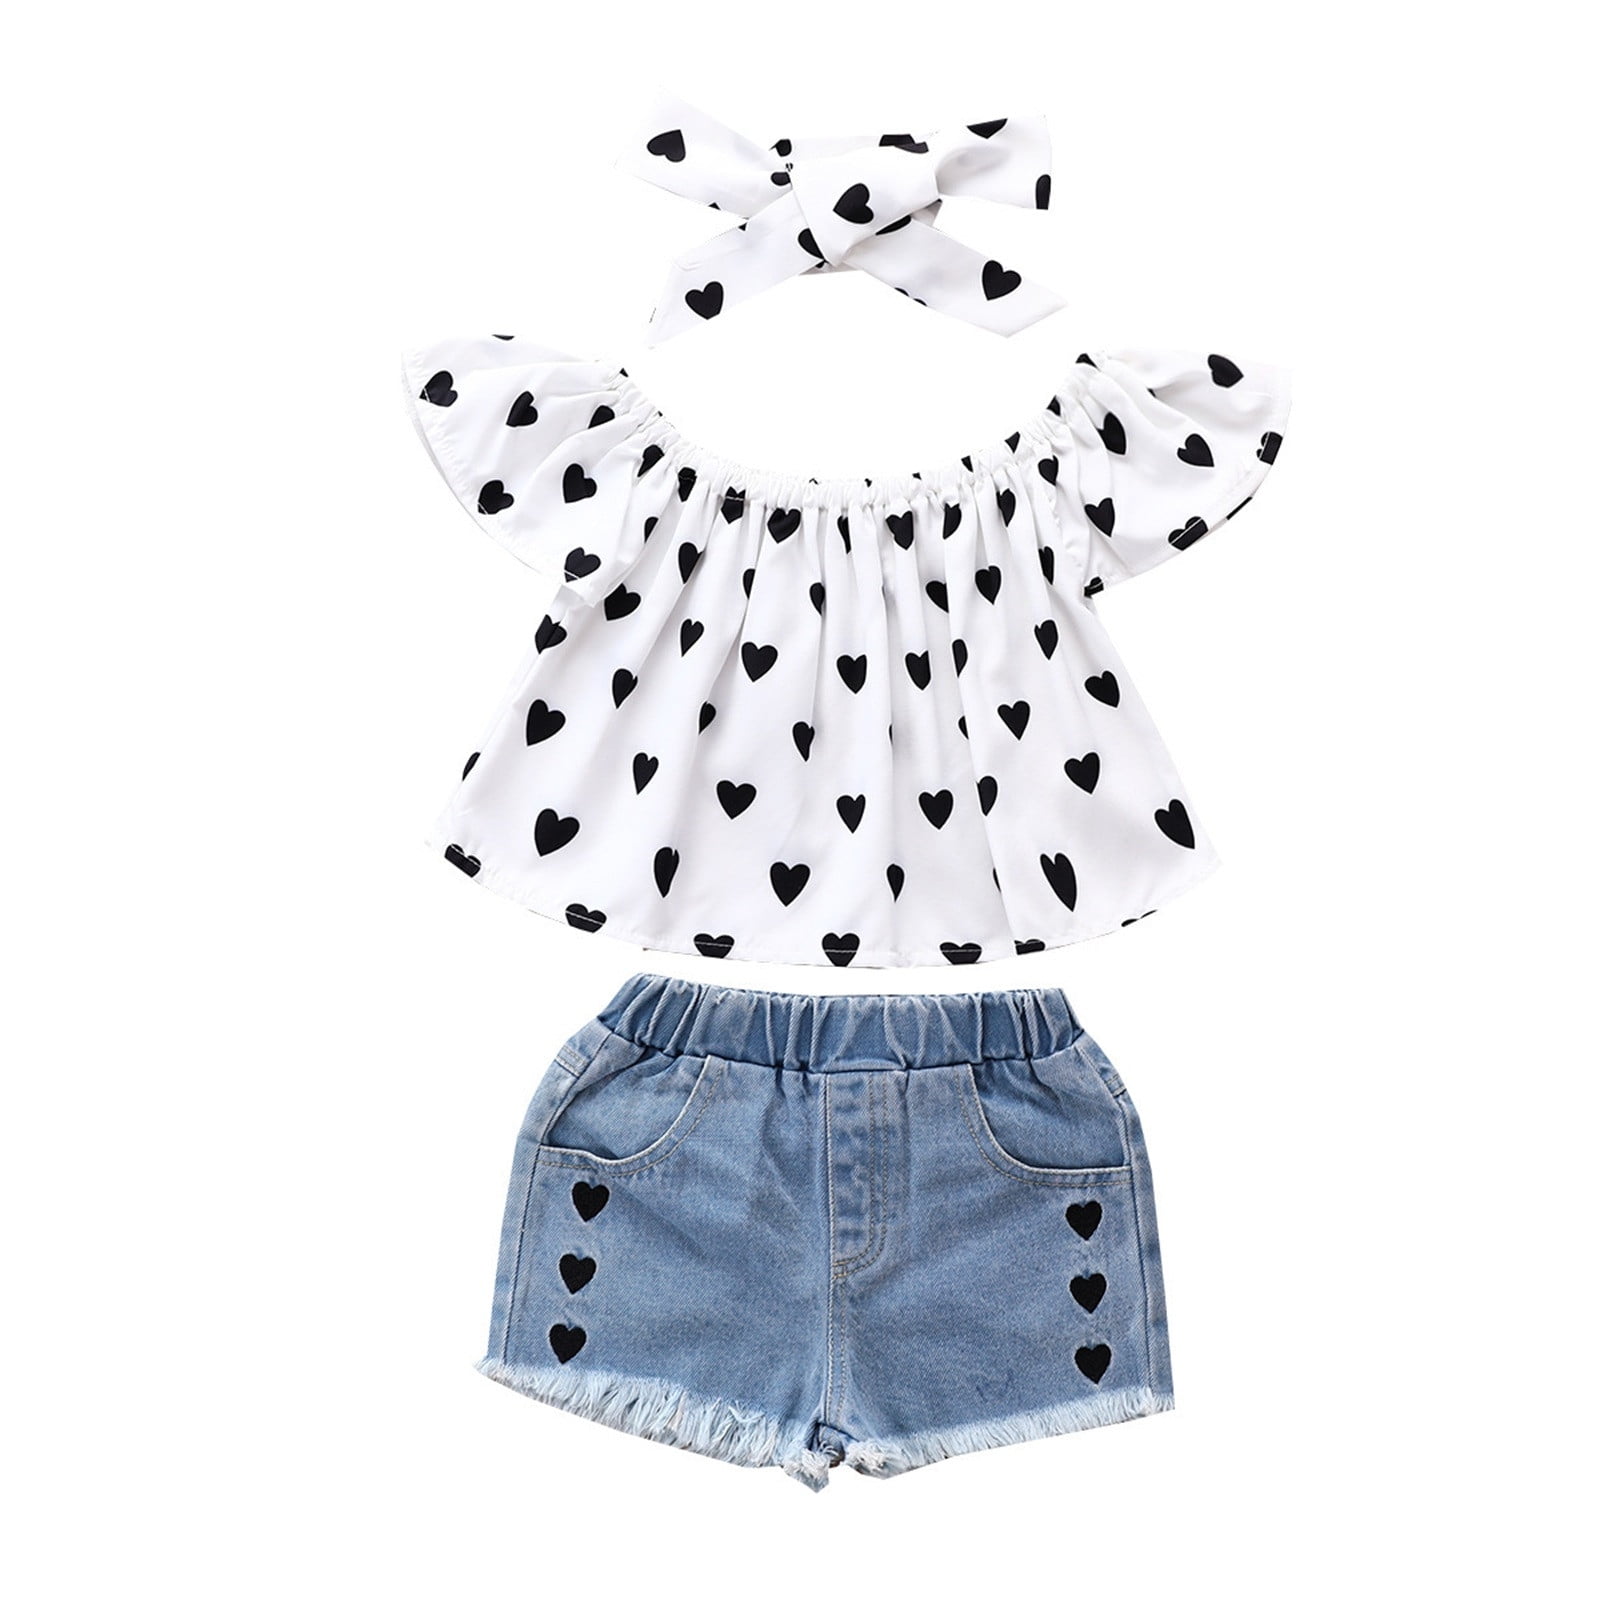 ZHAGHMIN Cute Clothes For Girls 8-9 Years Old Kids Toddler Baby Girls Short  Sleeve Off Shoulder Love Print Tops Jeans Shorts Pants With Headbands 3Pcs